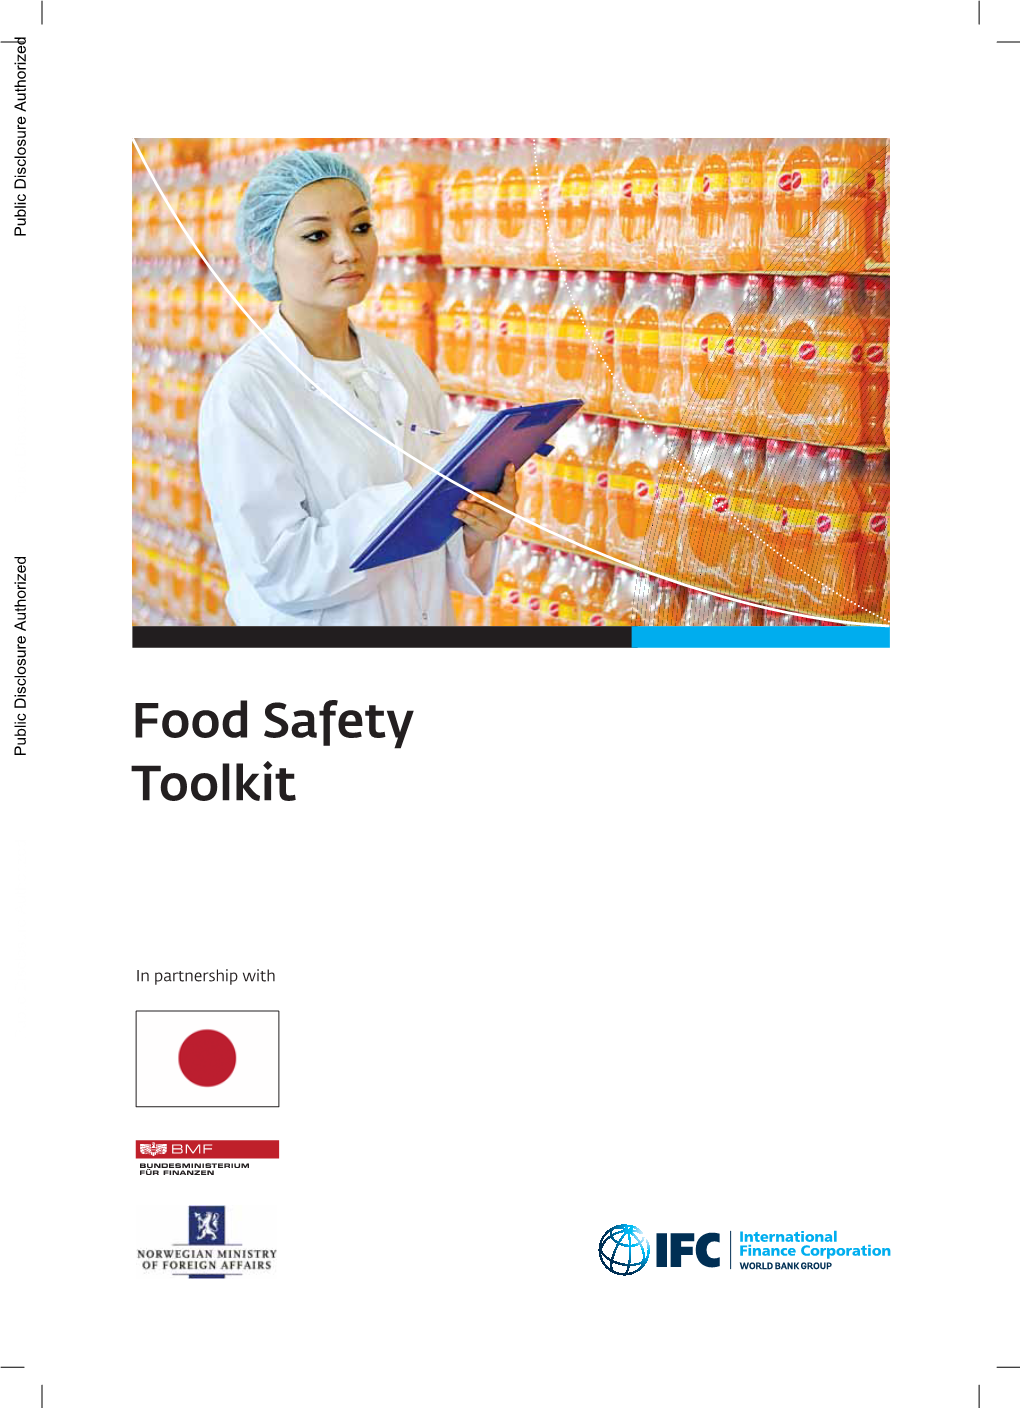 Food Safety Toolkit Has Been Produced by IFC Through Its Global Food Safety Advisory Program